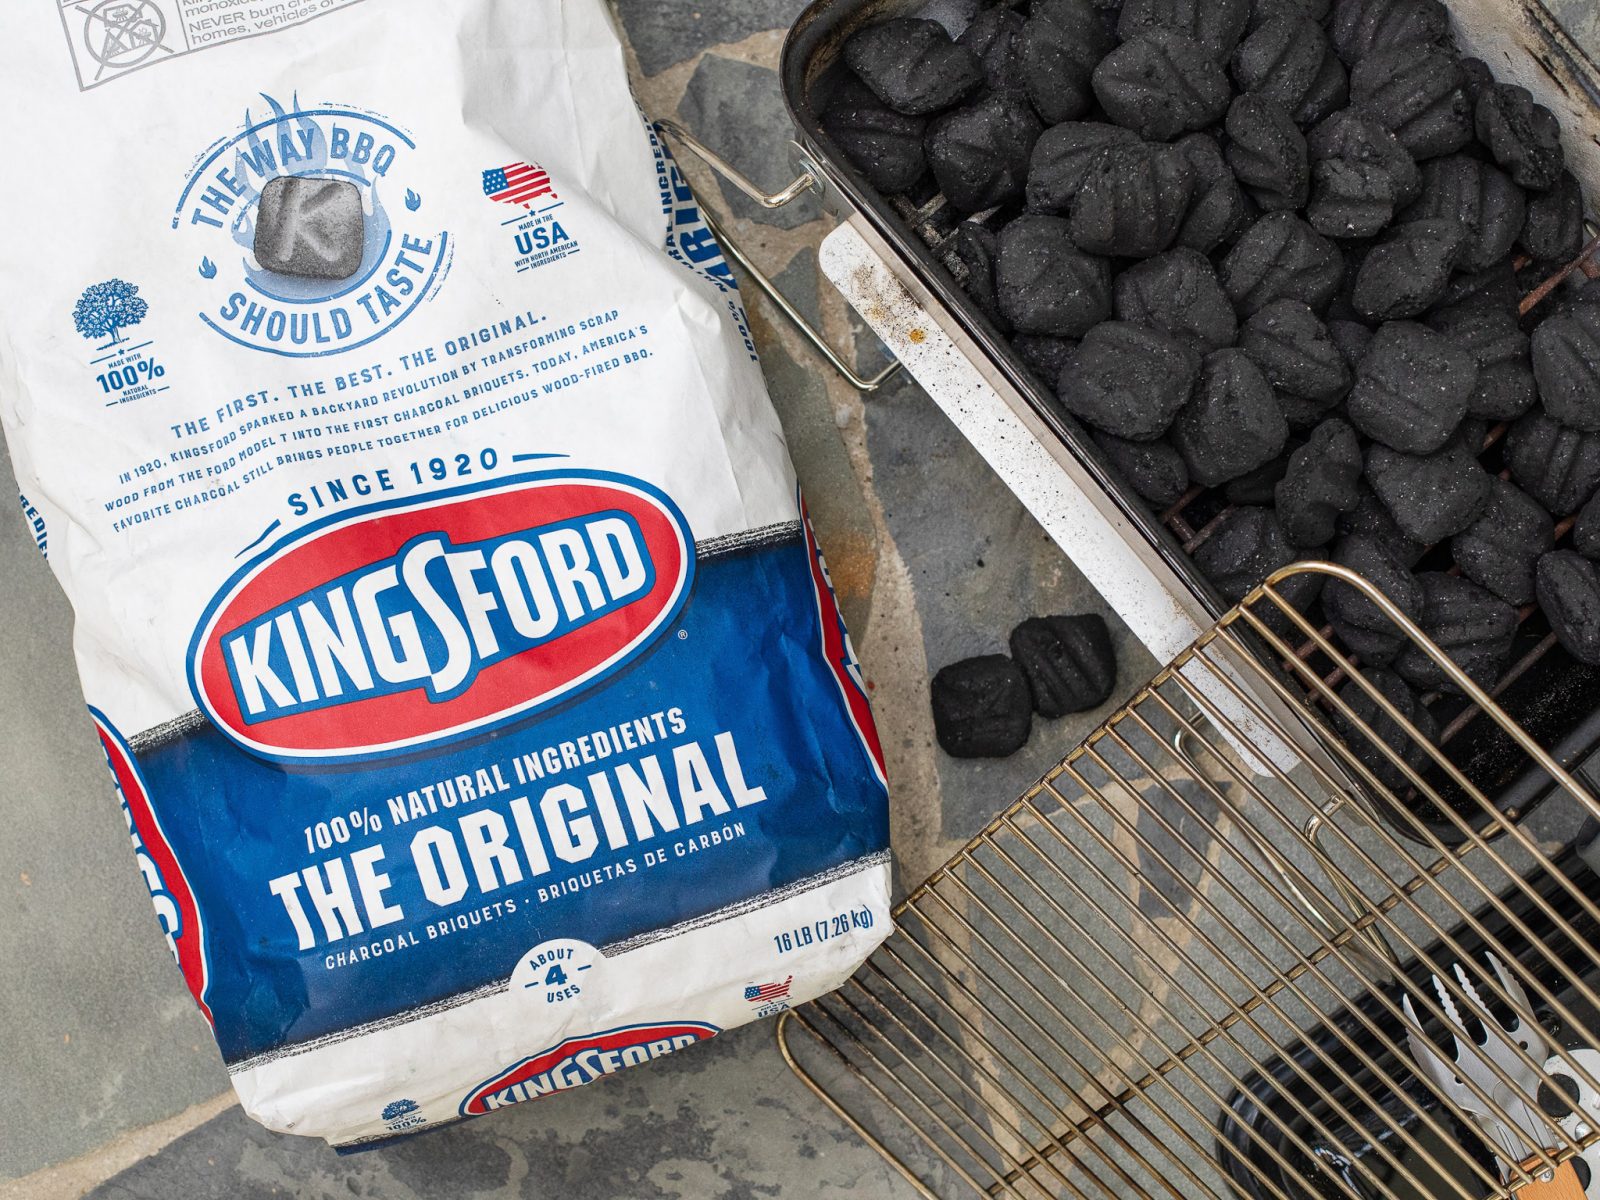 Kingsford Charcoal Briquets As Low As $7.99 At Publix (Regular Price $15.43)